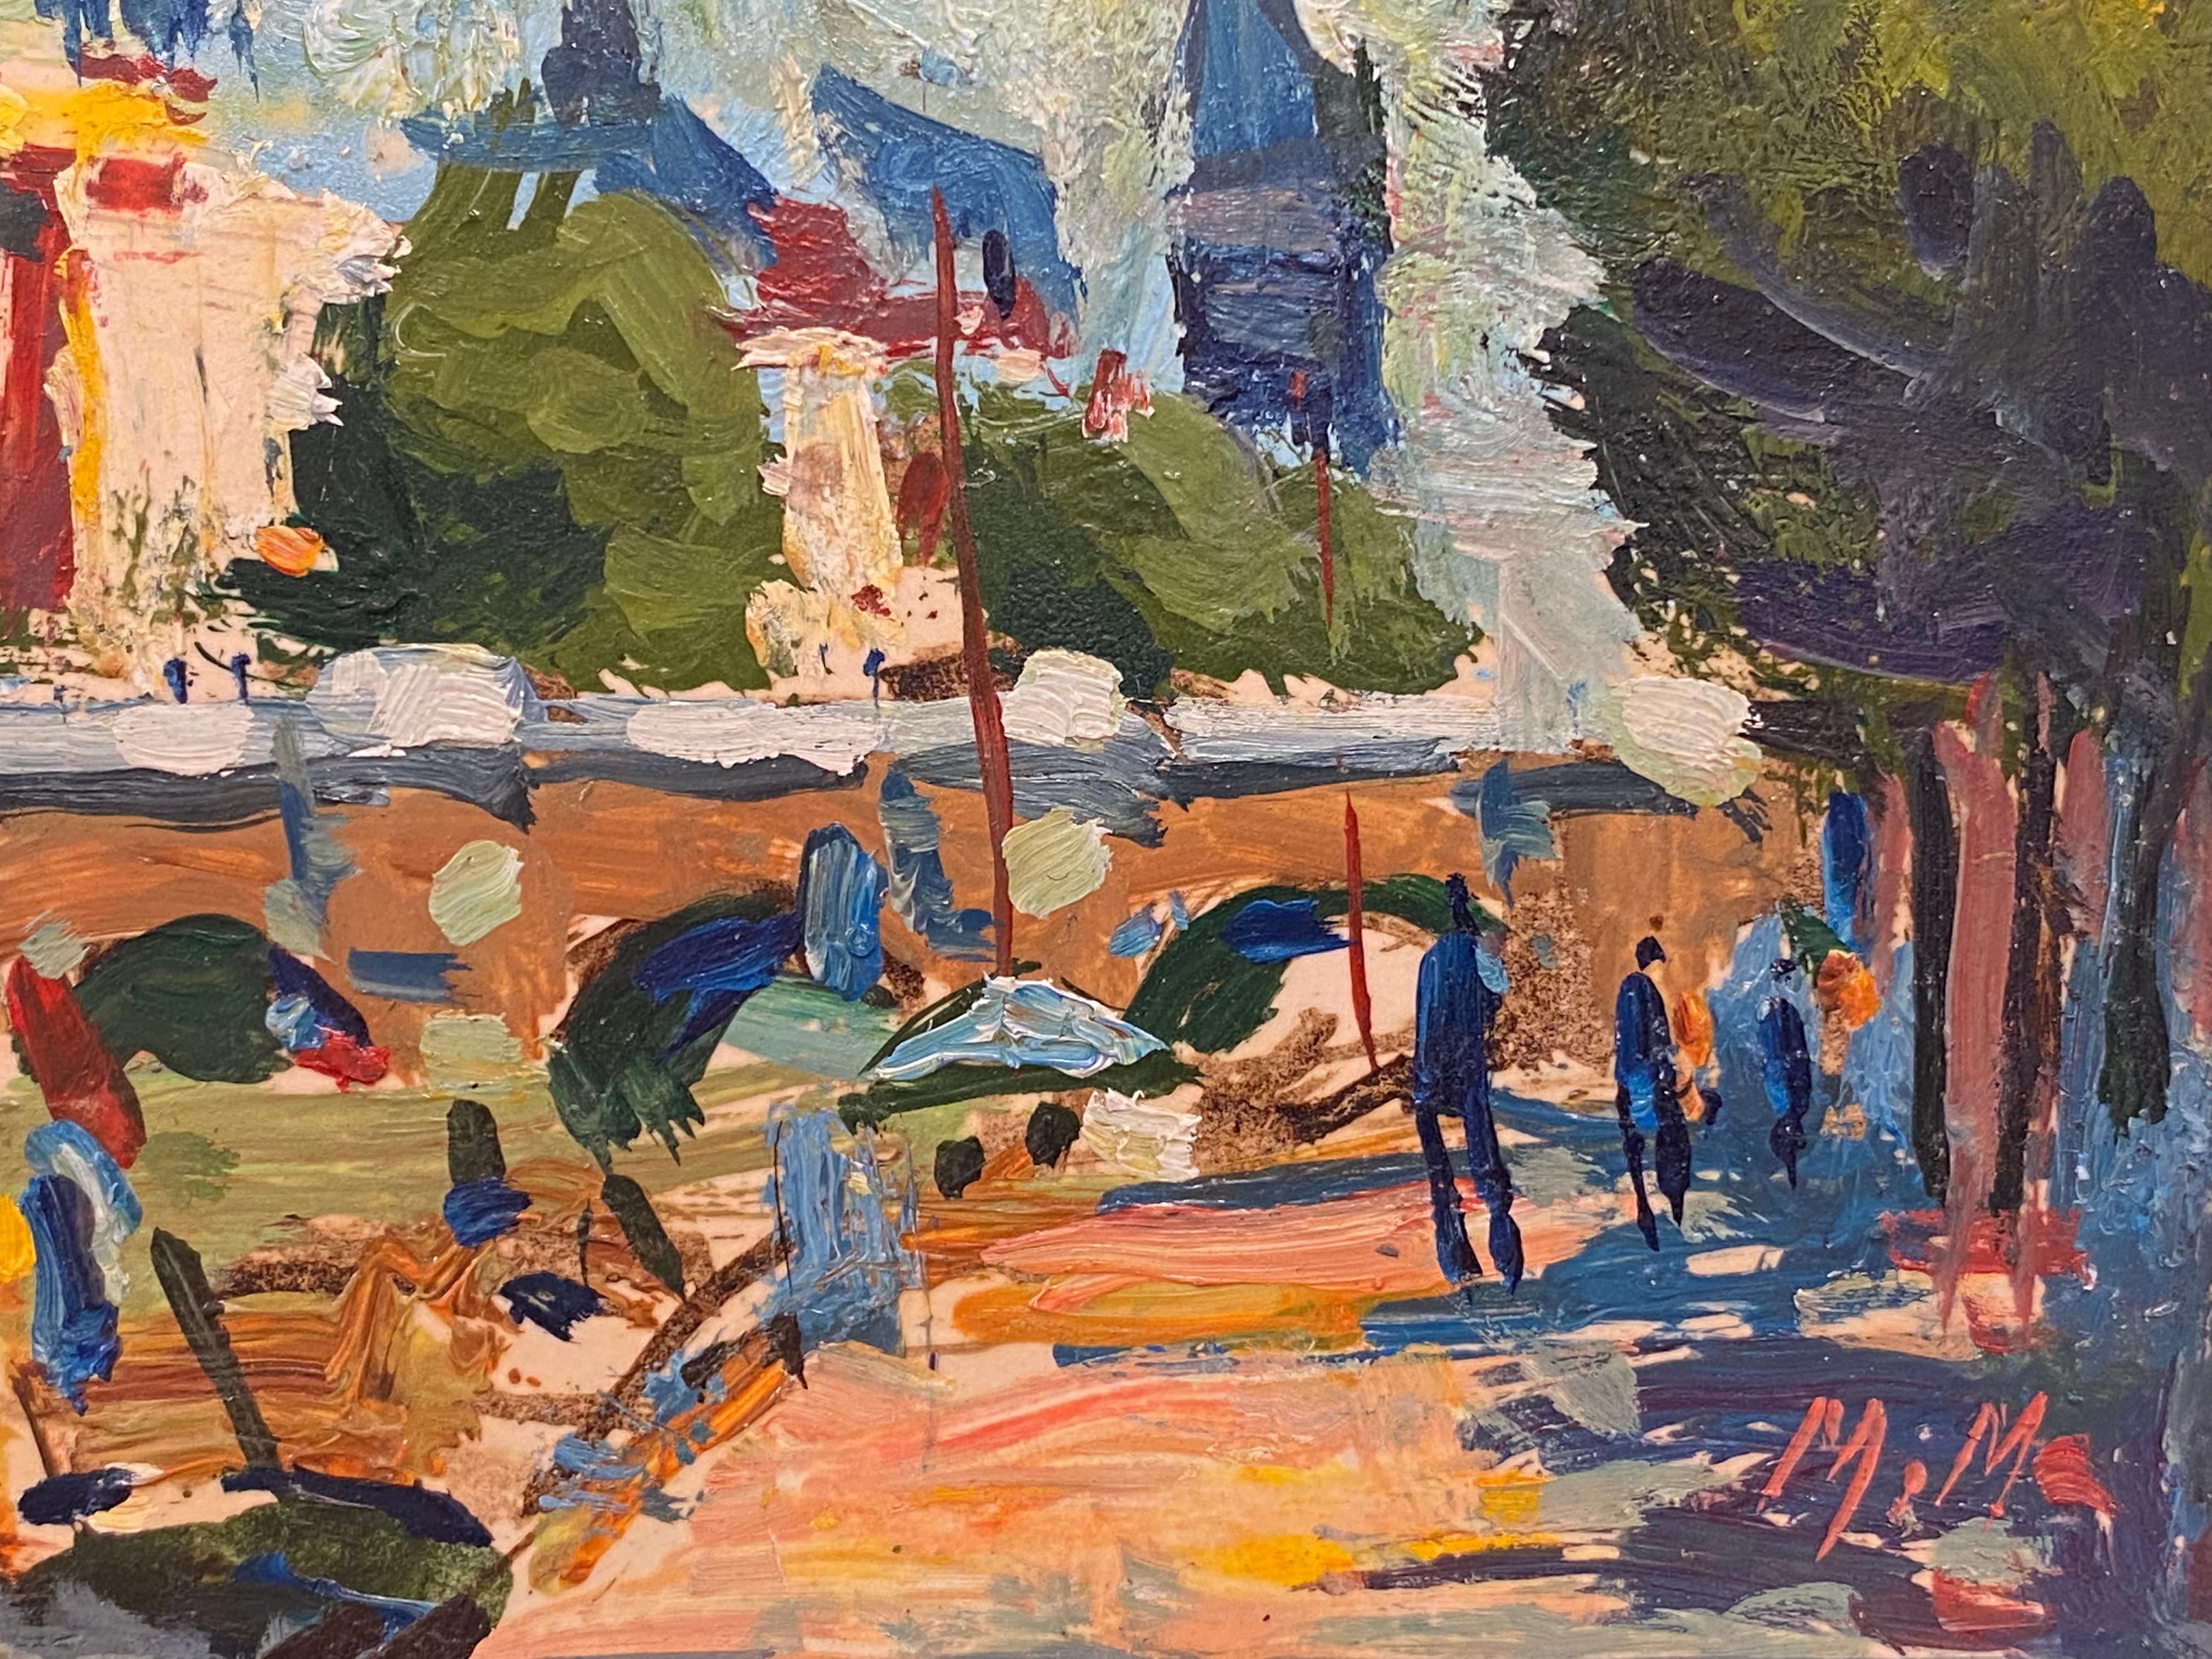 Paris
by Maurice Mazeilie (French)
oil painting on card, unframed
stamped verso

painting: 5 x 6.5 inches

A delightful original oil painting by the 20th century French Impressionist artist, Maurice Mazeilie. The painting has excellent provenance